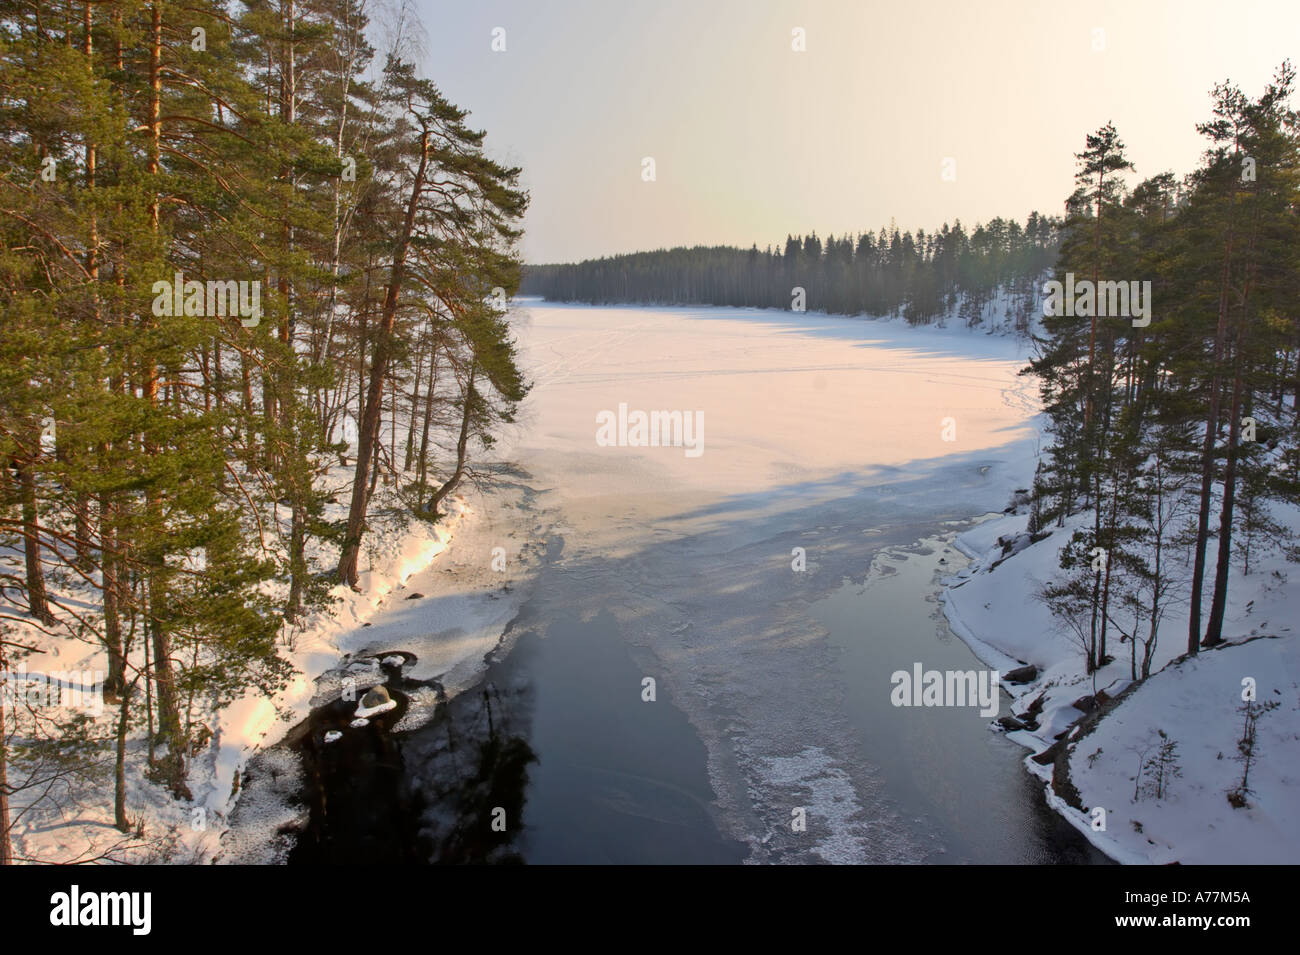 A view from a hanging bridge over Lapinsalmi Sound, Repovesi National Park, Valkeala, Finland Stock Photo